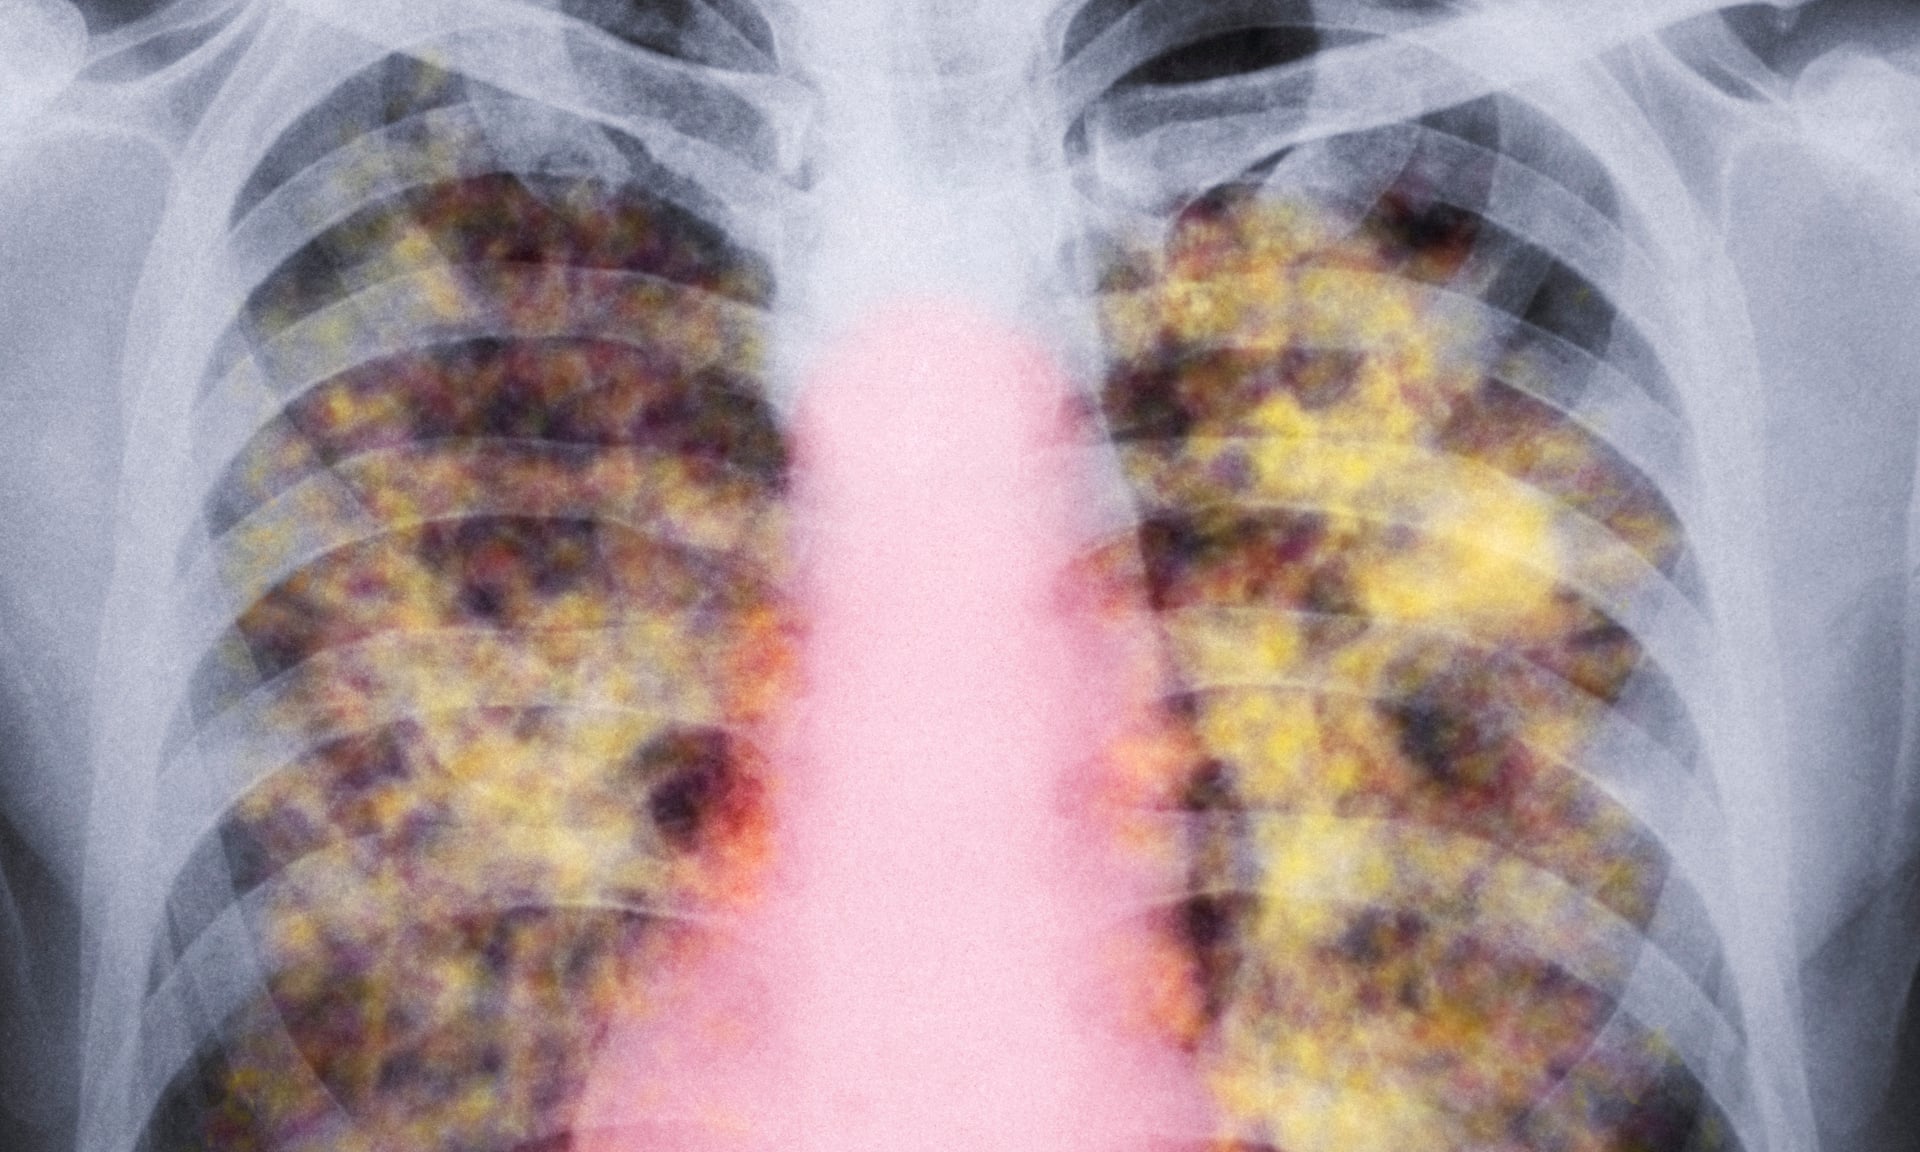 chest CT image showing asbestos damage